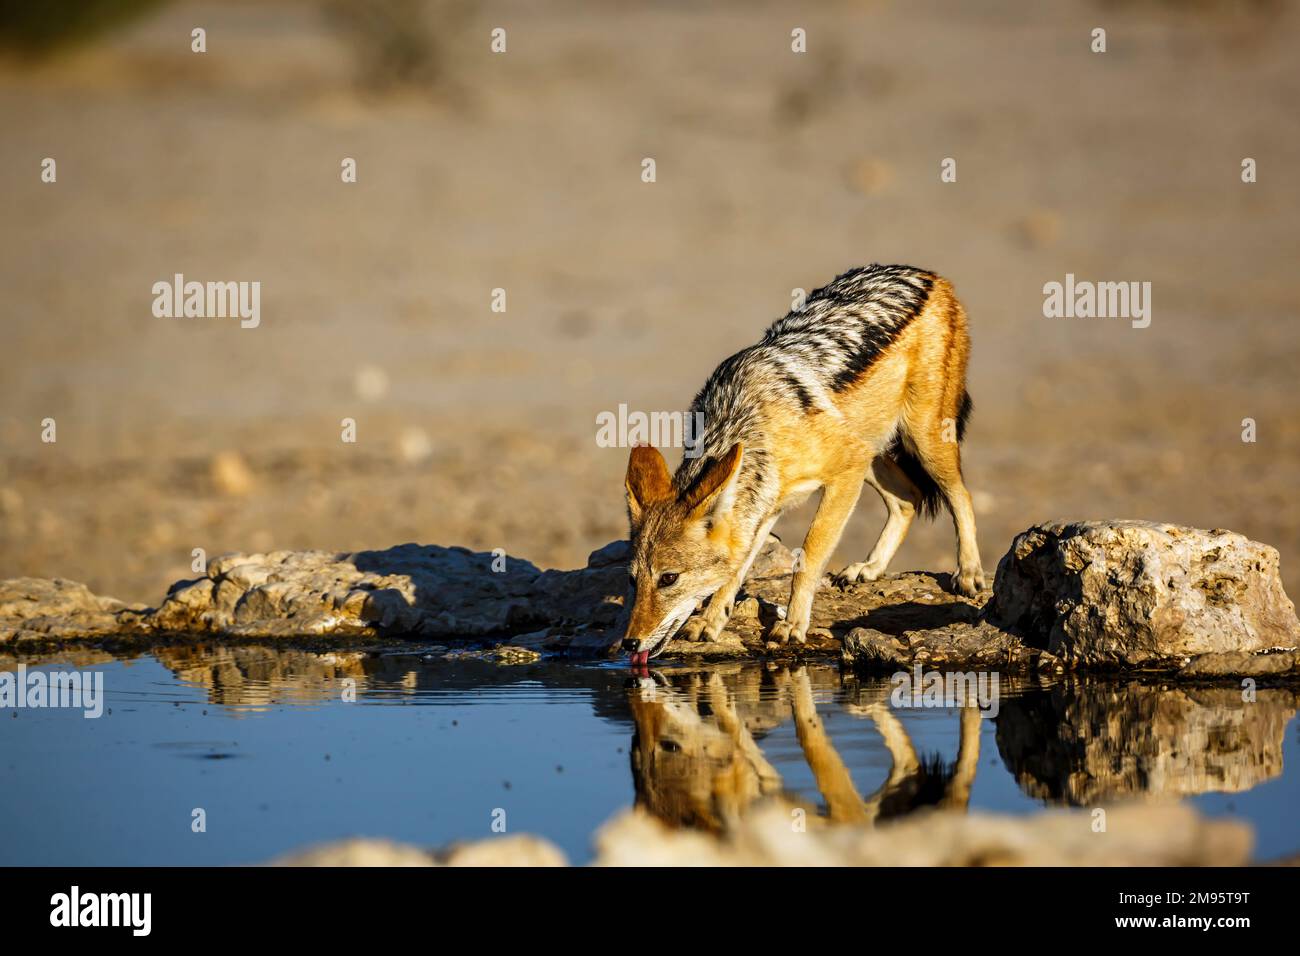 Black backed jackal drinking at waterhole in Kgalagadi transfrontier park, South Africa ; Specie Canis mesomelas family of Canidae Stock Photo